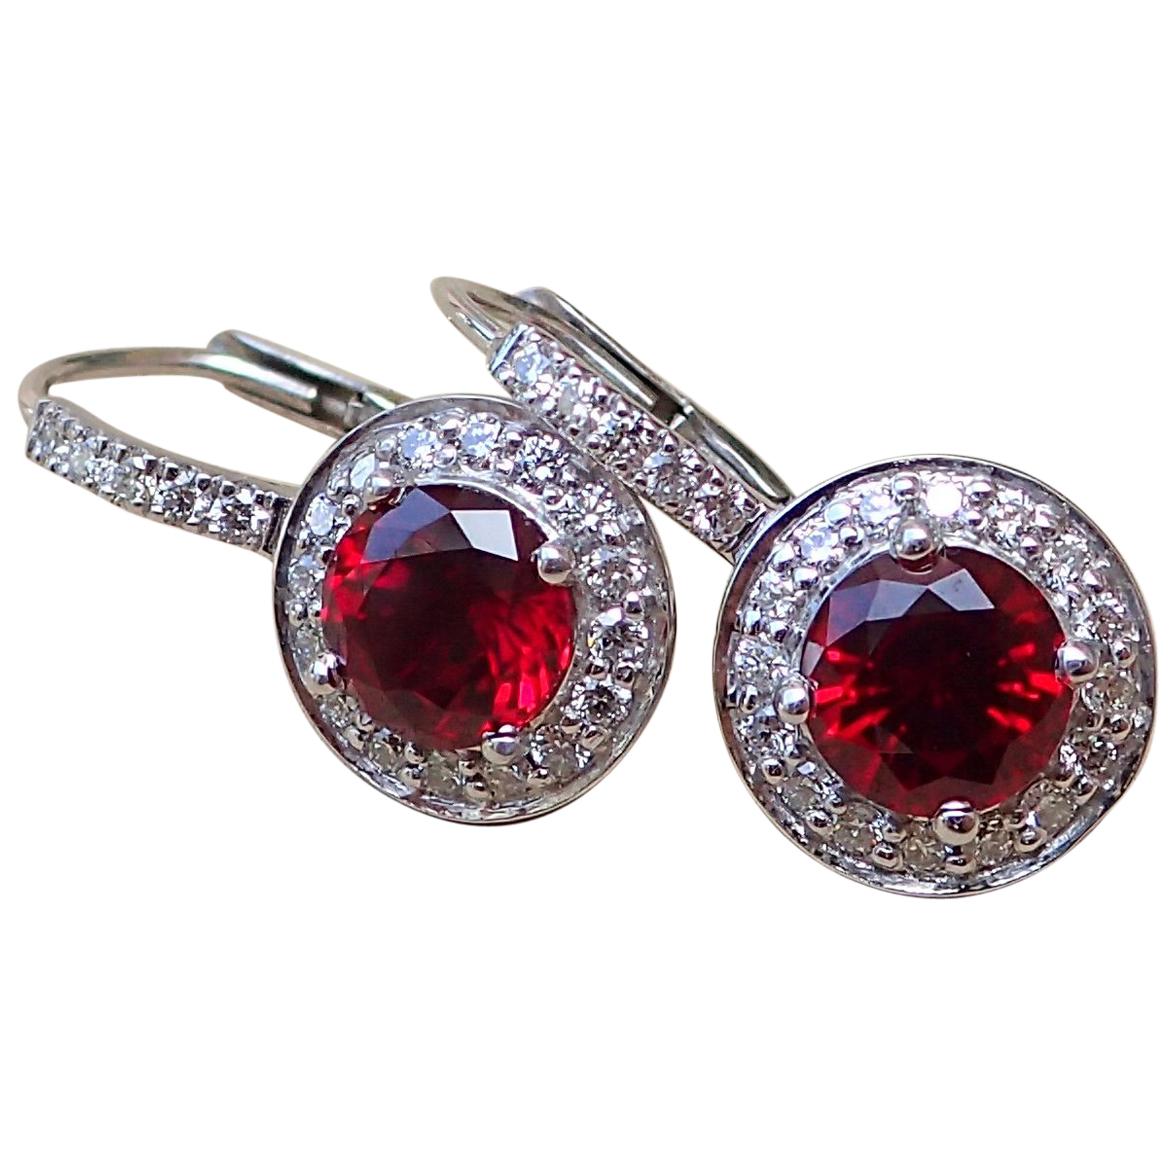 18k White Gold Earrings - 2.43 carats Chatham-Created Ruby & 0.41 carats Diamond